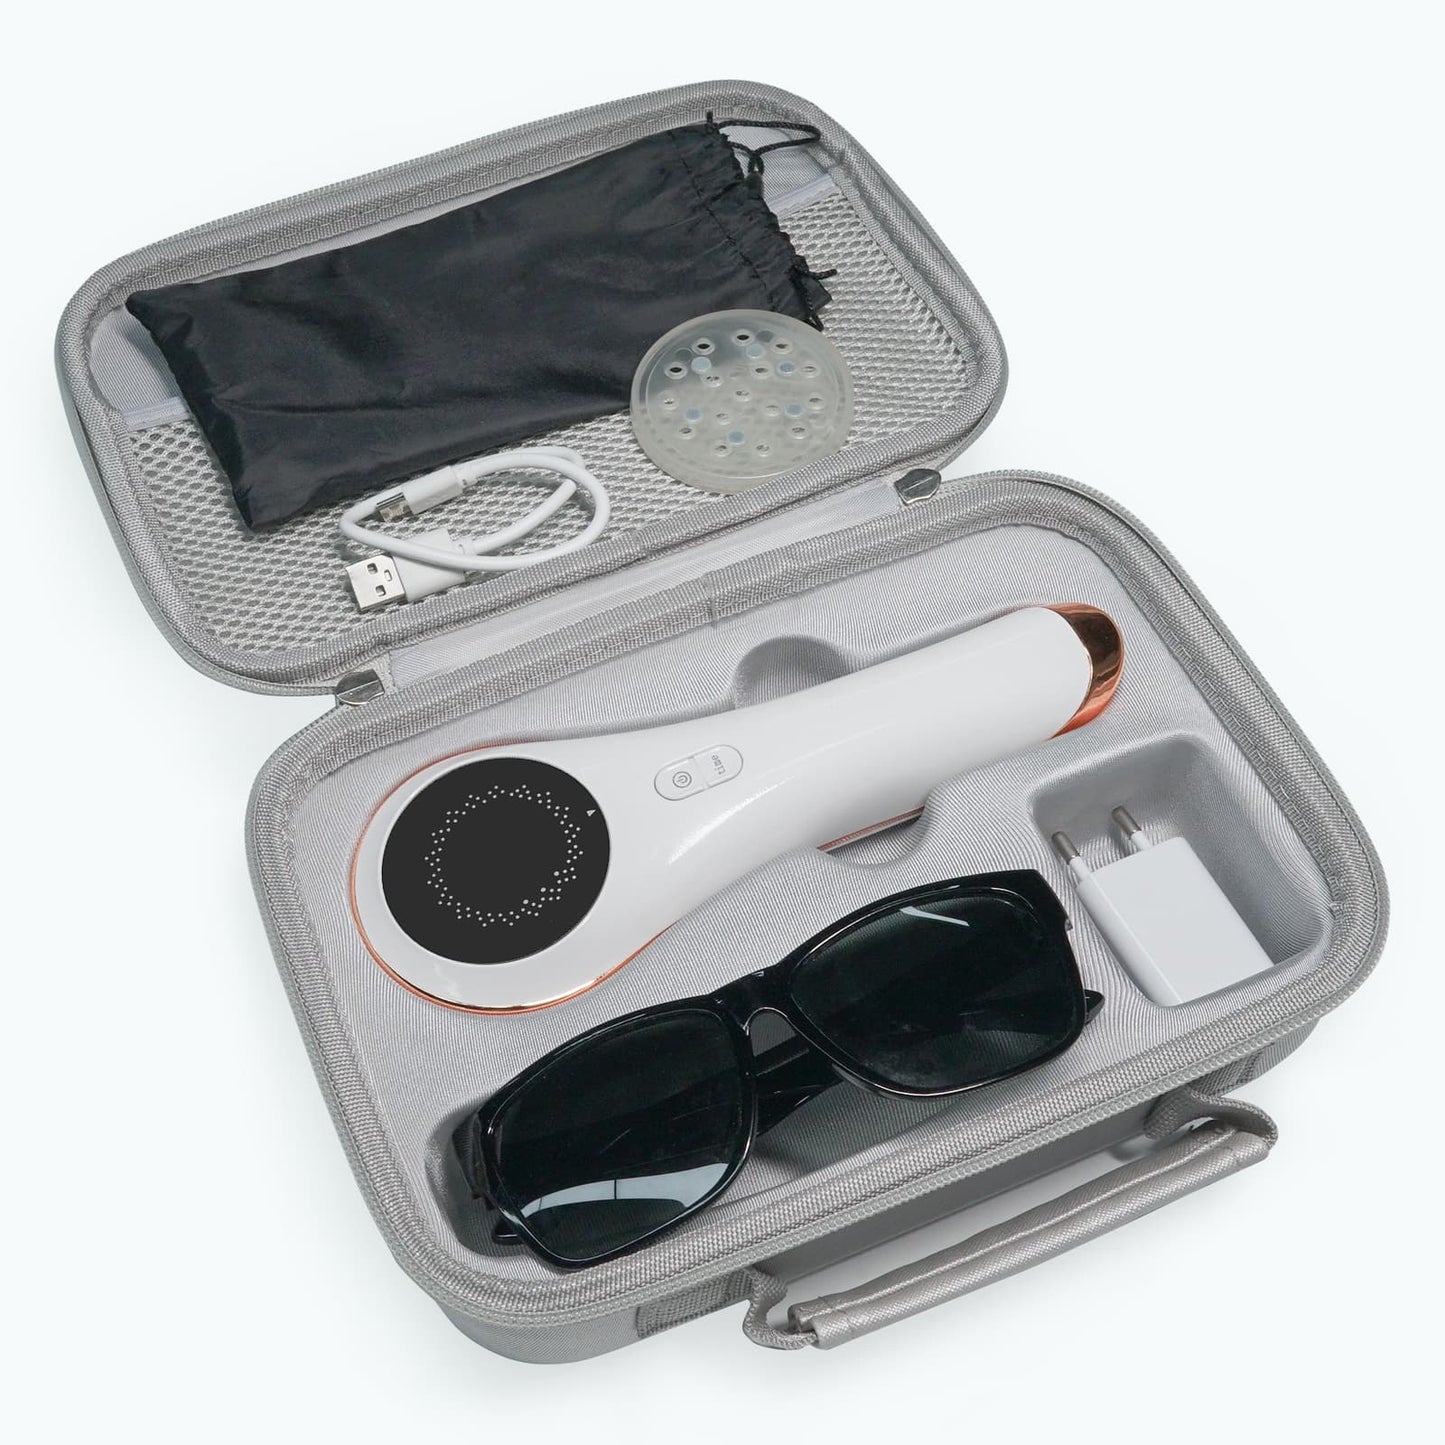 pinfriy®  Home-use Cold Laser Therapy Device